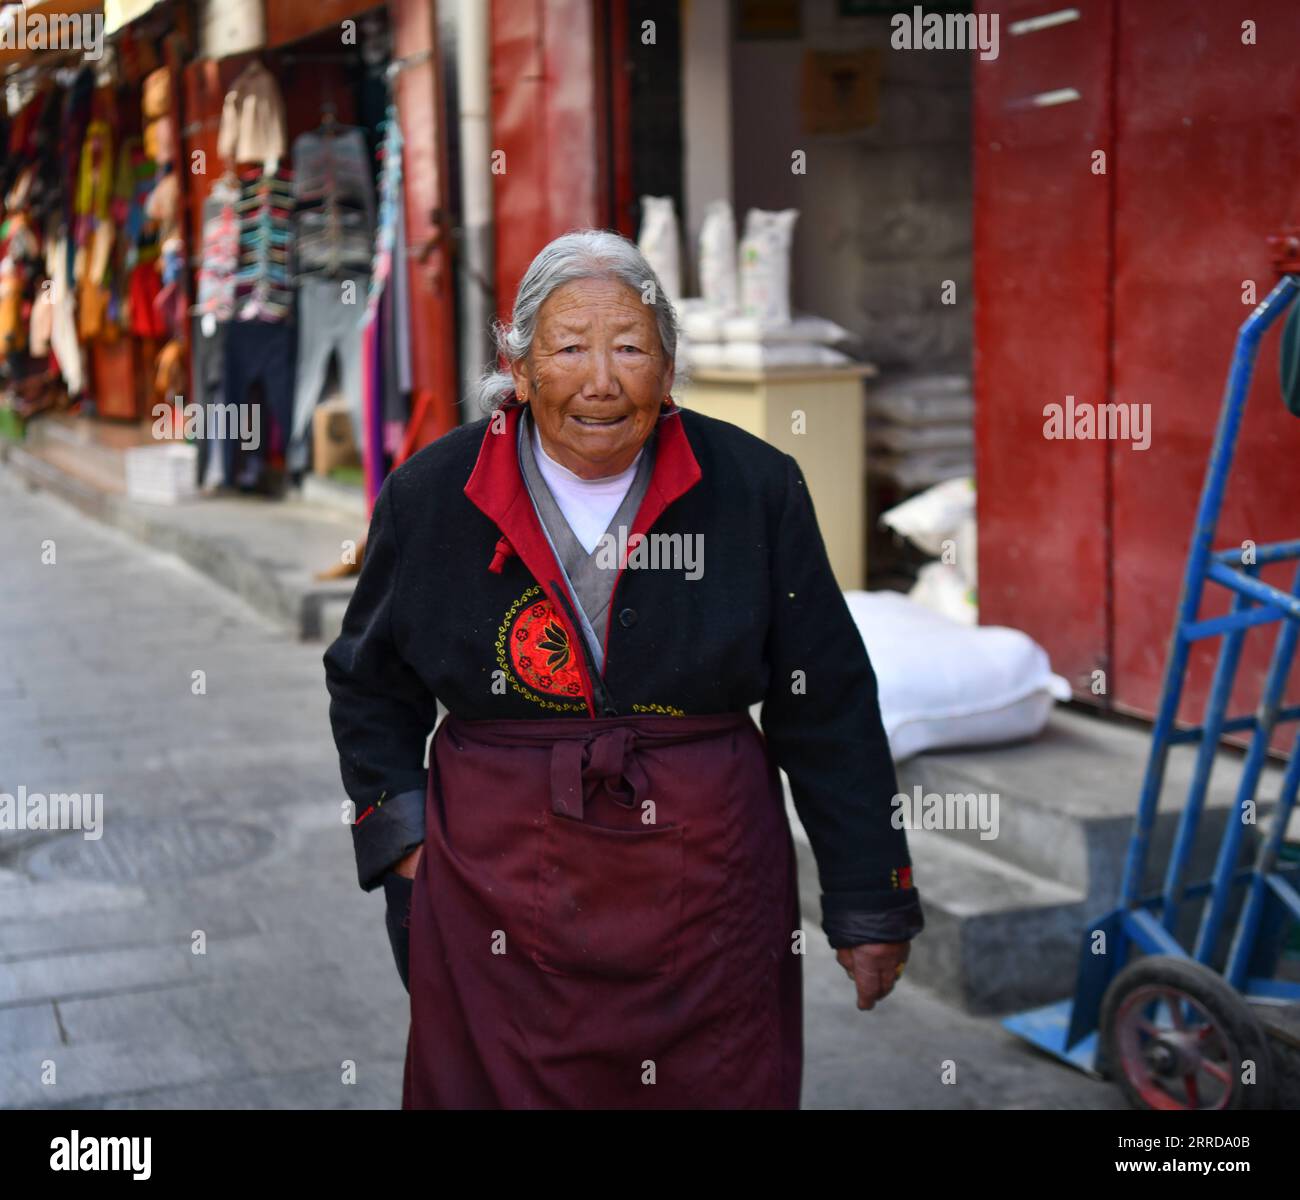 211213 -- LHASA, Dec. 13, 2021 -- Migmar Tsamjo walks on the street in Lhasa, southwest China s Tibet Autonomous Region, Dec. 7, 2021. Migmar Tsamjo was born in 1933. She herded cattle for the serf owner and lived a miserable life in childhood. She fled from the serf owner in 1955, and was later rescued by the People s Liberation Army. She then was sent to Chengdu in southwest China s Sichuan Province and began to study at a college. In 1959, democratic reform was launched and feudal serfdom was finally abolished in Tibet. A million serfs and slaves were emancipated. Recalling bitter days of t Stock Photo